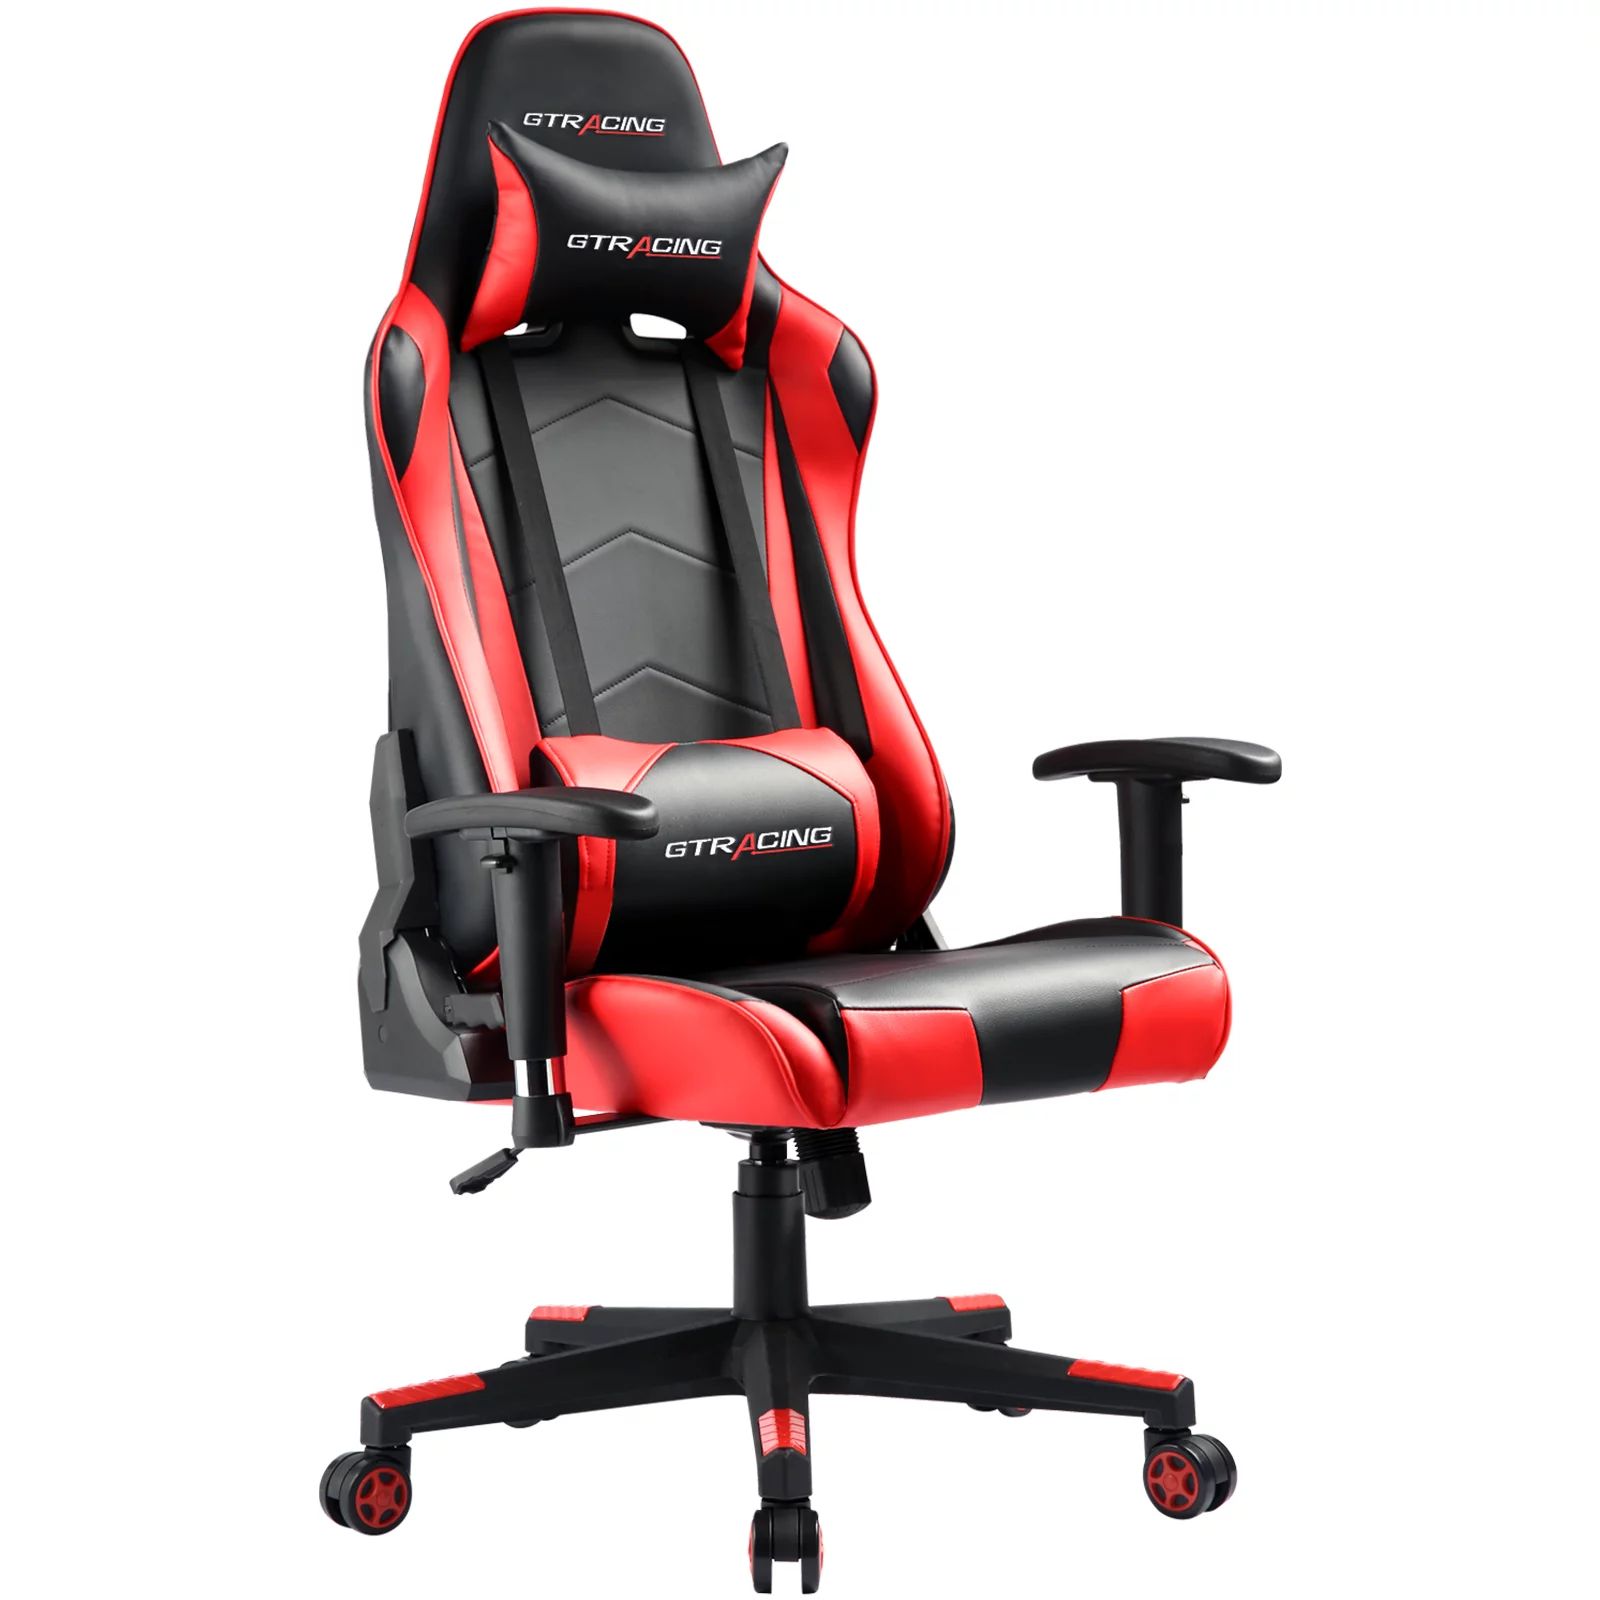 GTRACING Gaming Chair Office Chair PU Leather with Adjustable Headrest and Lumbar Pillow, Red | Walmart (US)